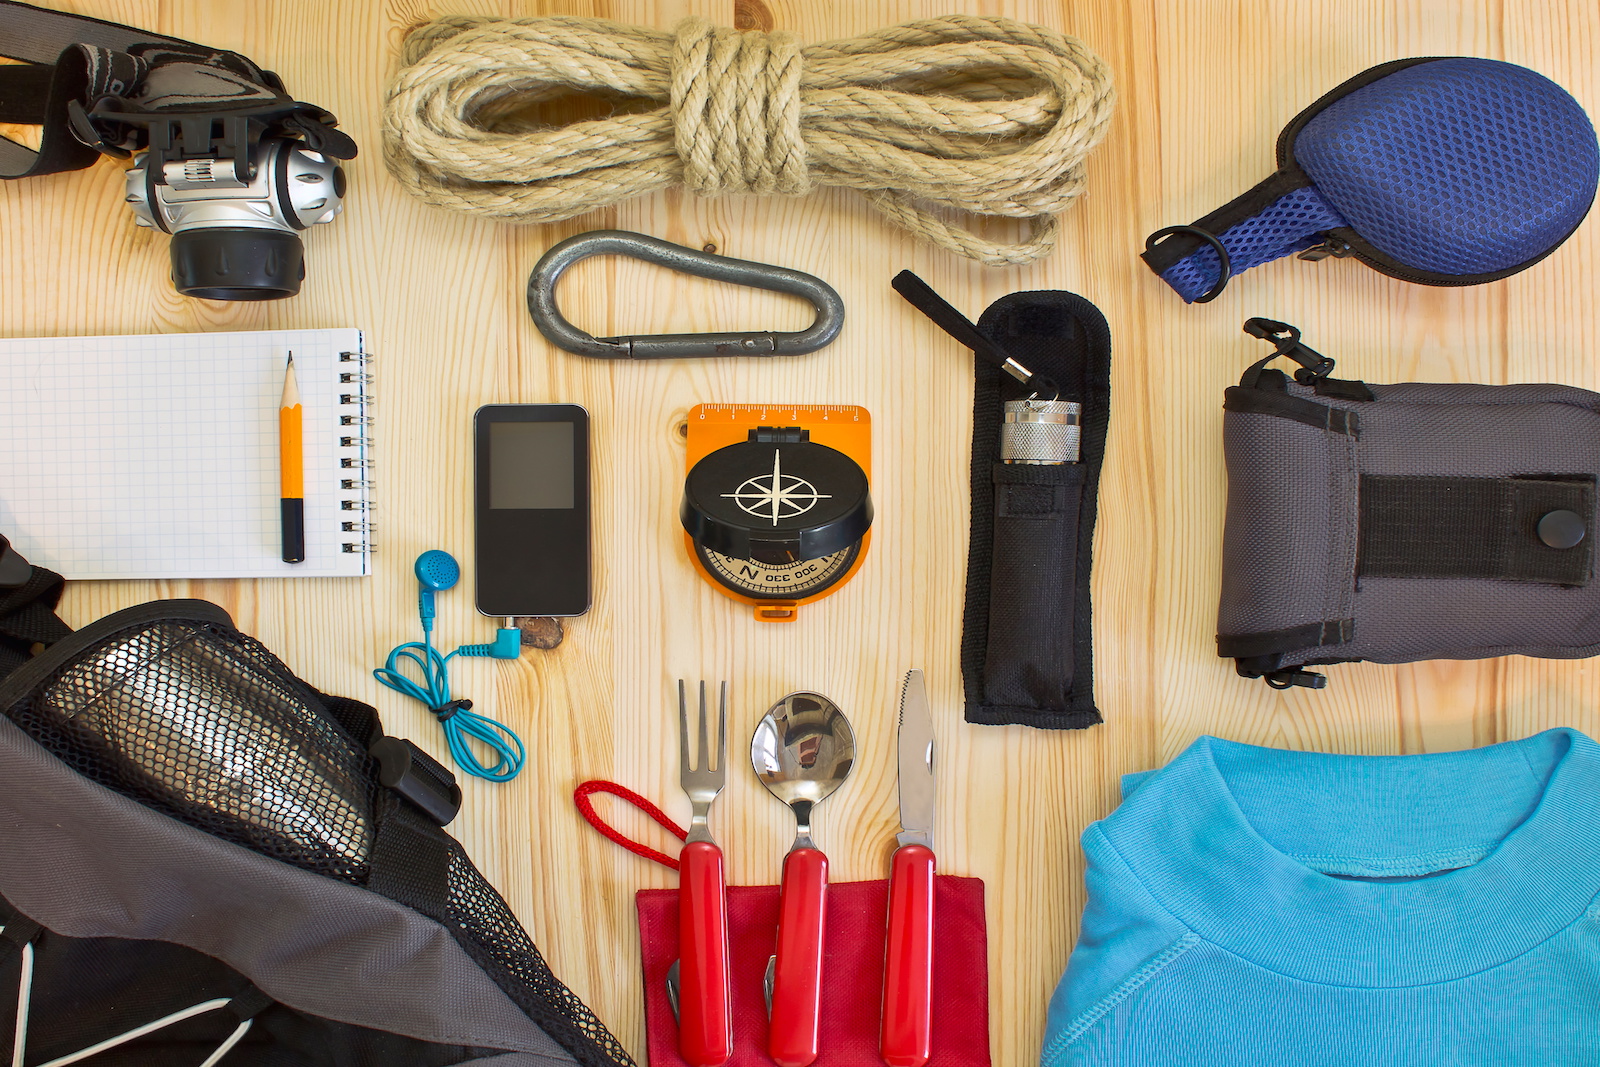 Supplies for a bug out bag laid out on a table